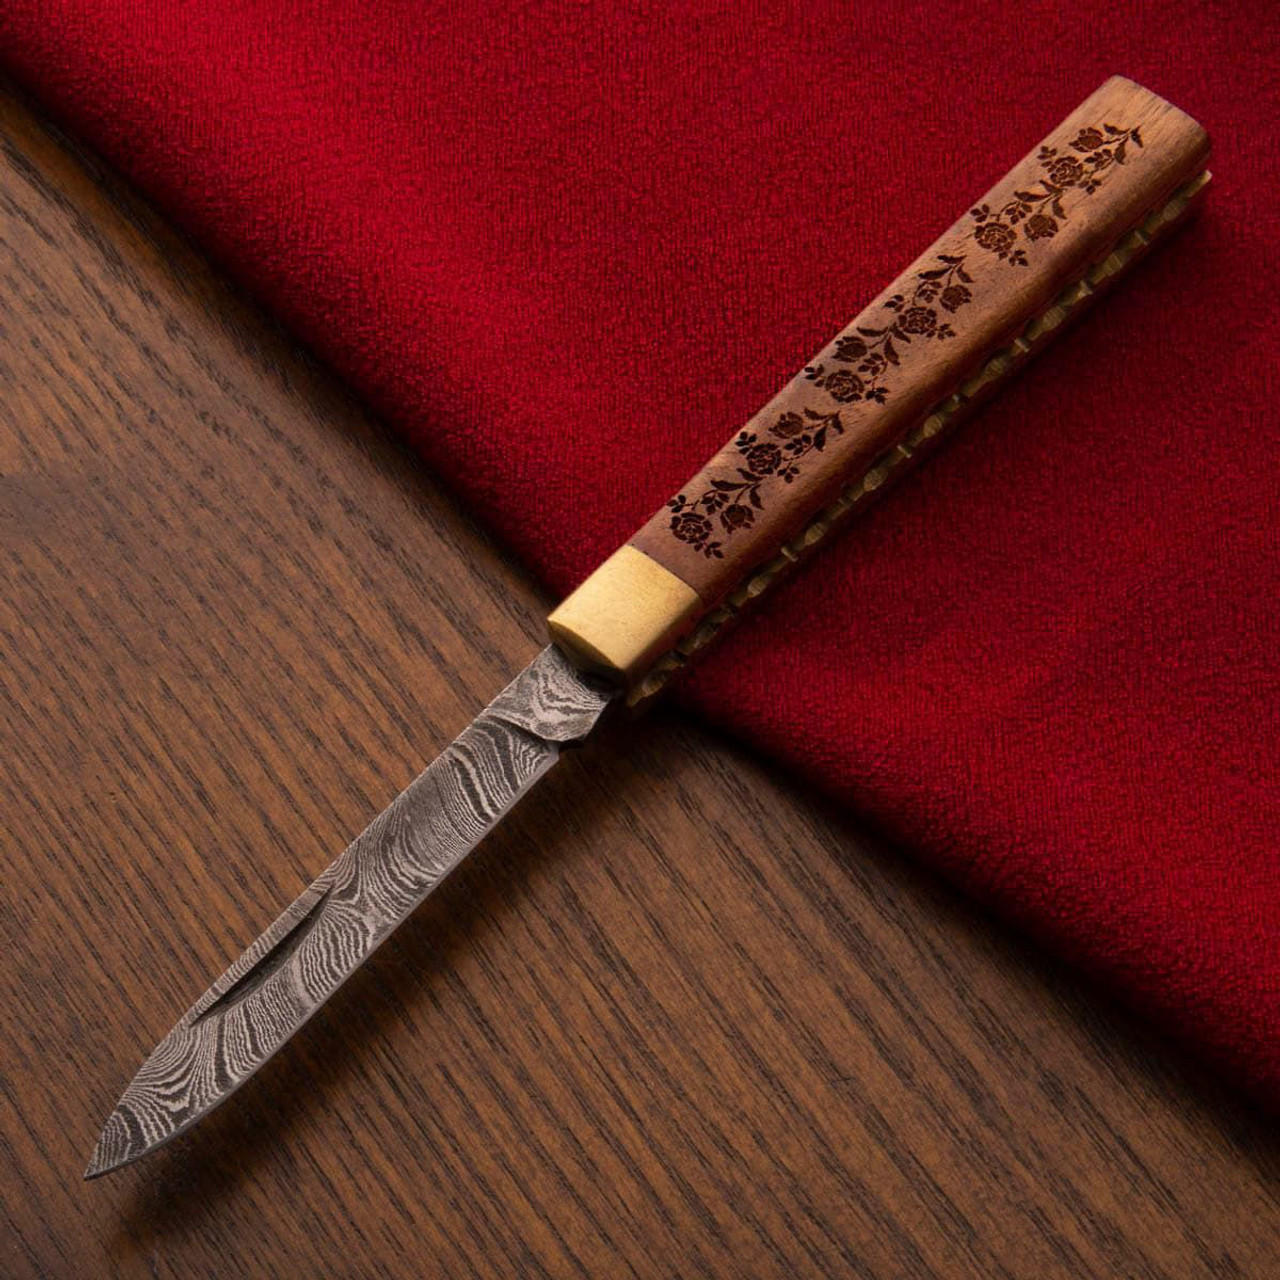 https://cdn11.bigcommerce.com/s-fy9rv139a5/images/stencil/1280x1280/products/11380/26154/0014131_clover-wood-damascus-doctors-knife__85711.1702988734.jpg?c=1